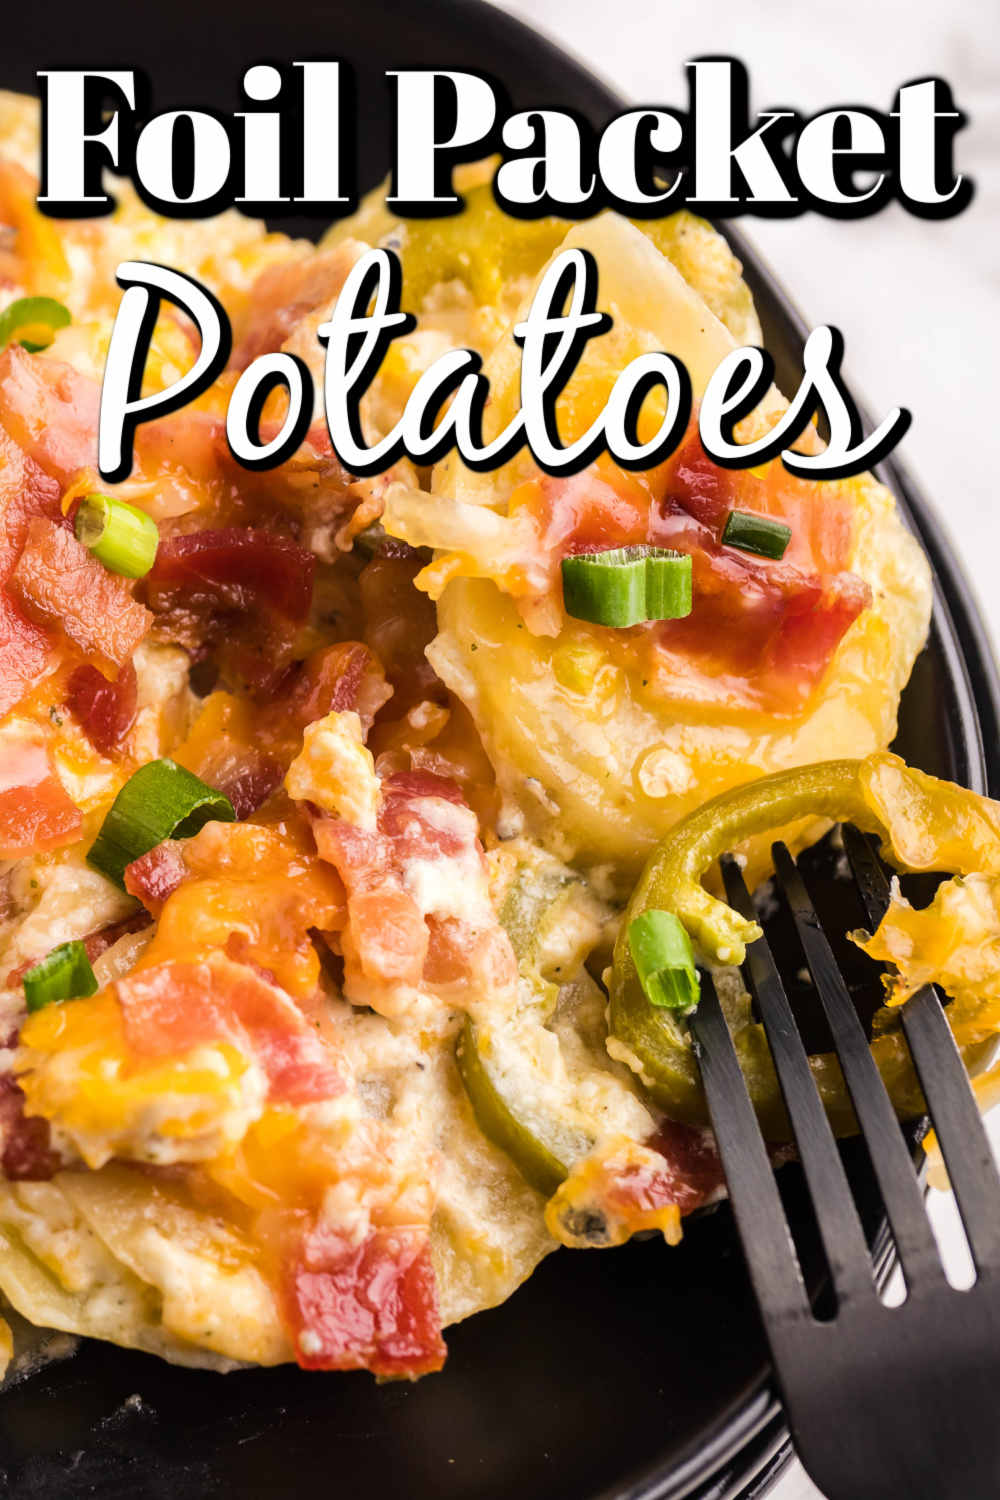 These Cheesy Jalapeno foil packet potatoes are easy to make and super flavorful, the perfect side dish.